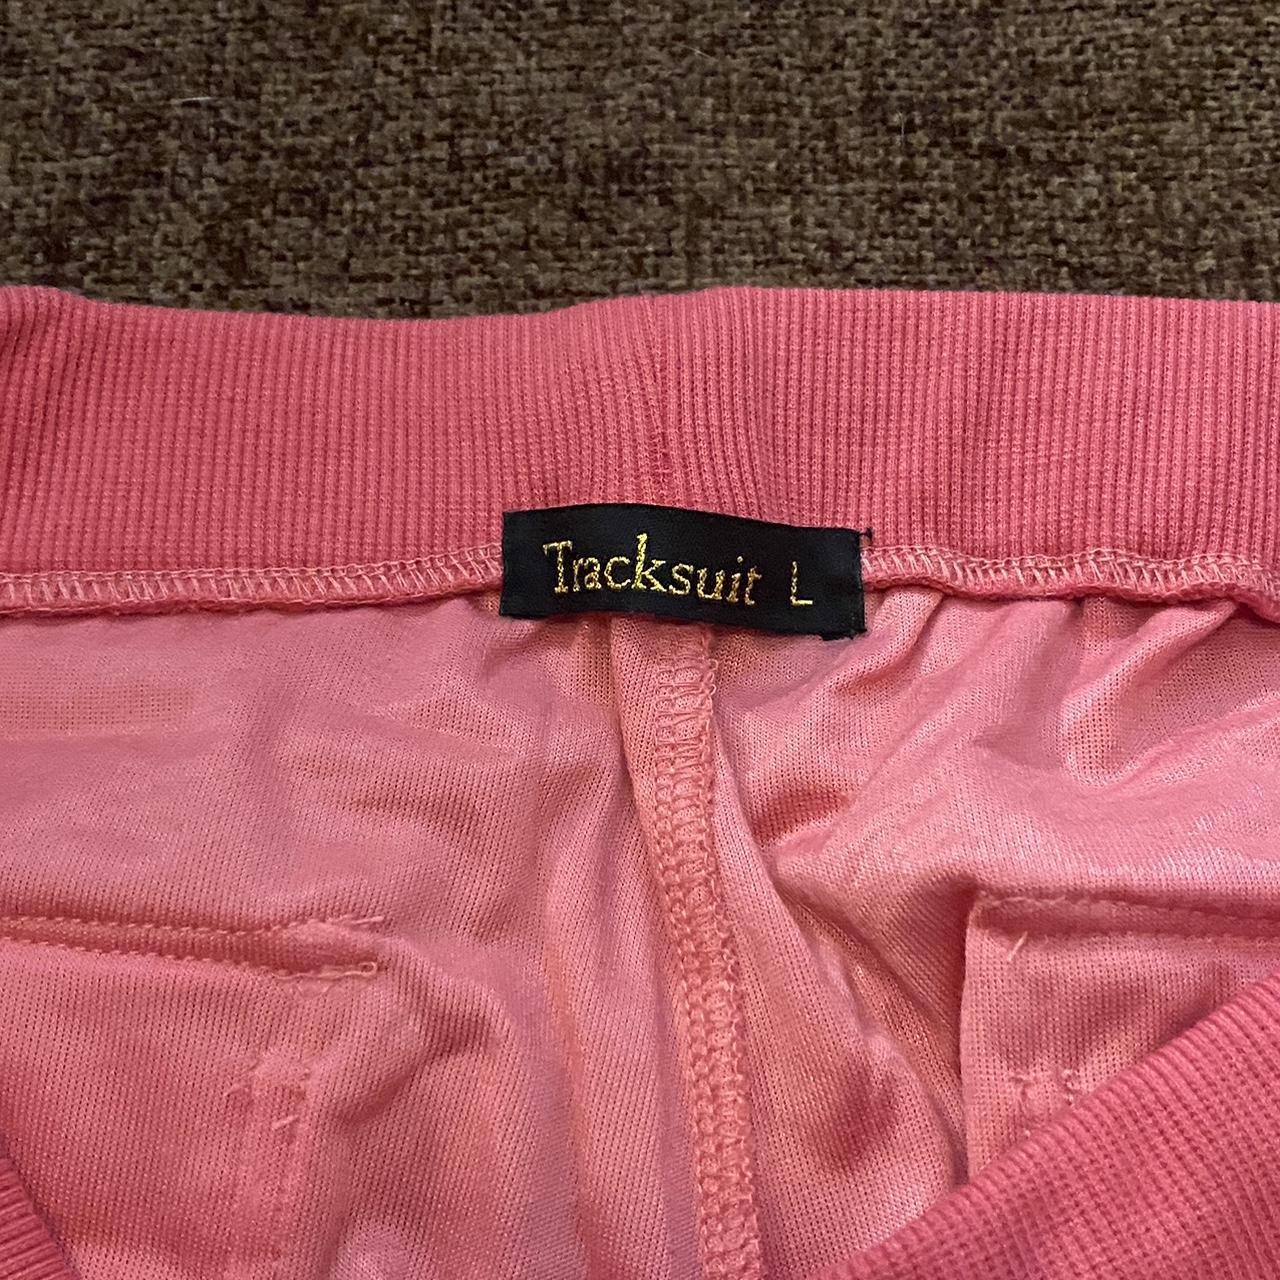 Y2K Tracksuit Pink Fuzzy Sweatpants!🎀 📌These pink... - Depop